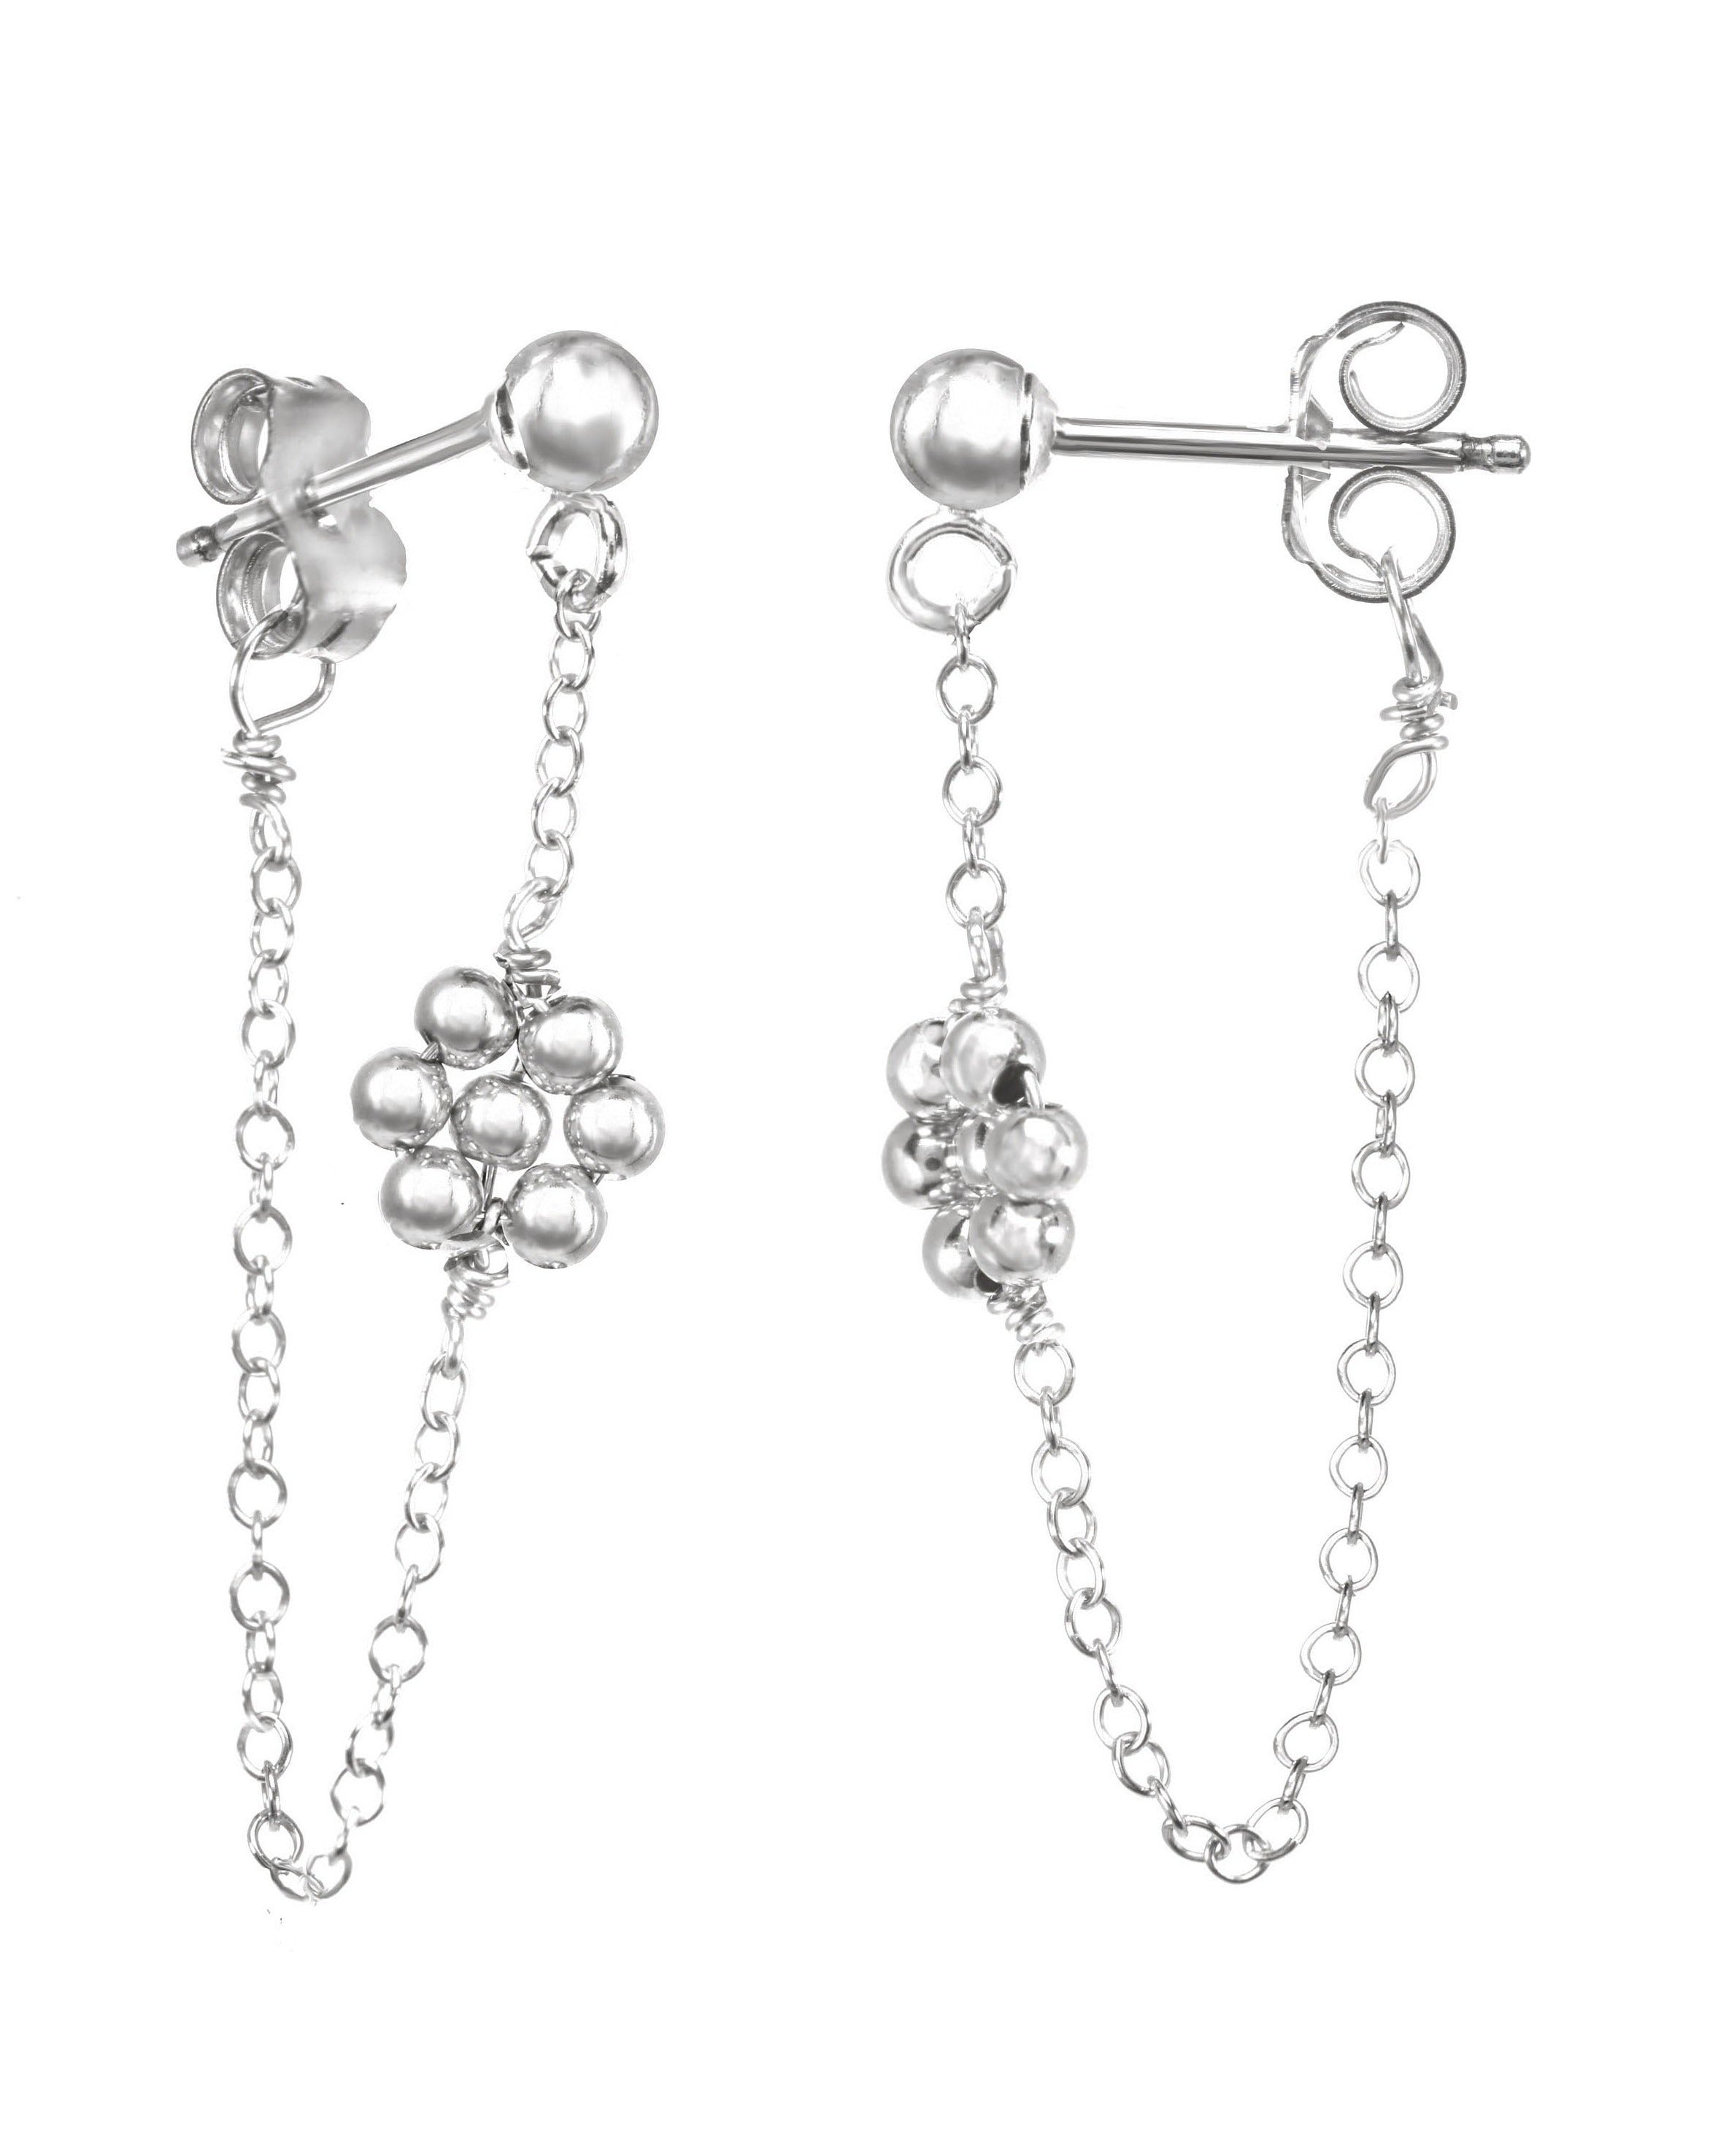 Rosana Earrings by KOZAKH. Front/back style stud closure earrings, crafted in Sterling Silver, featuring dangling handmade beaded daisy charms.